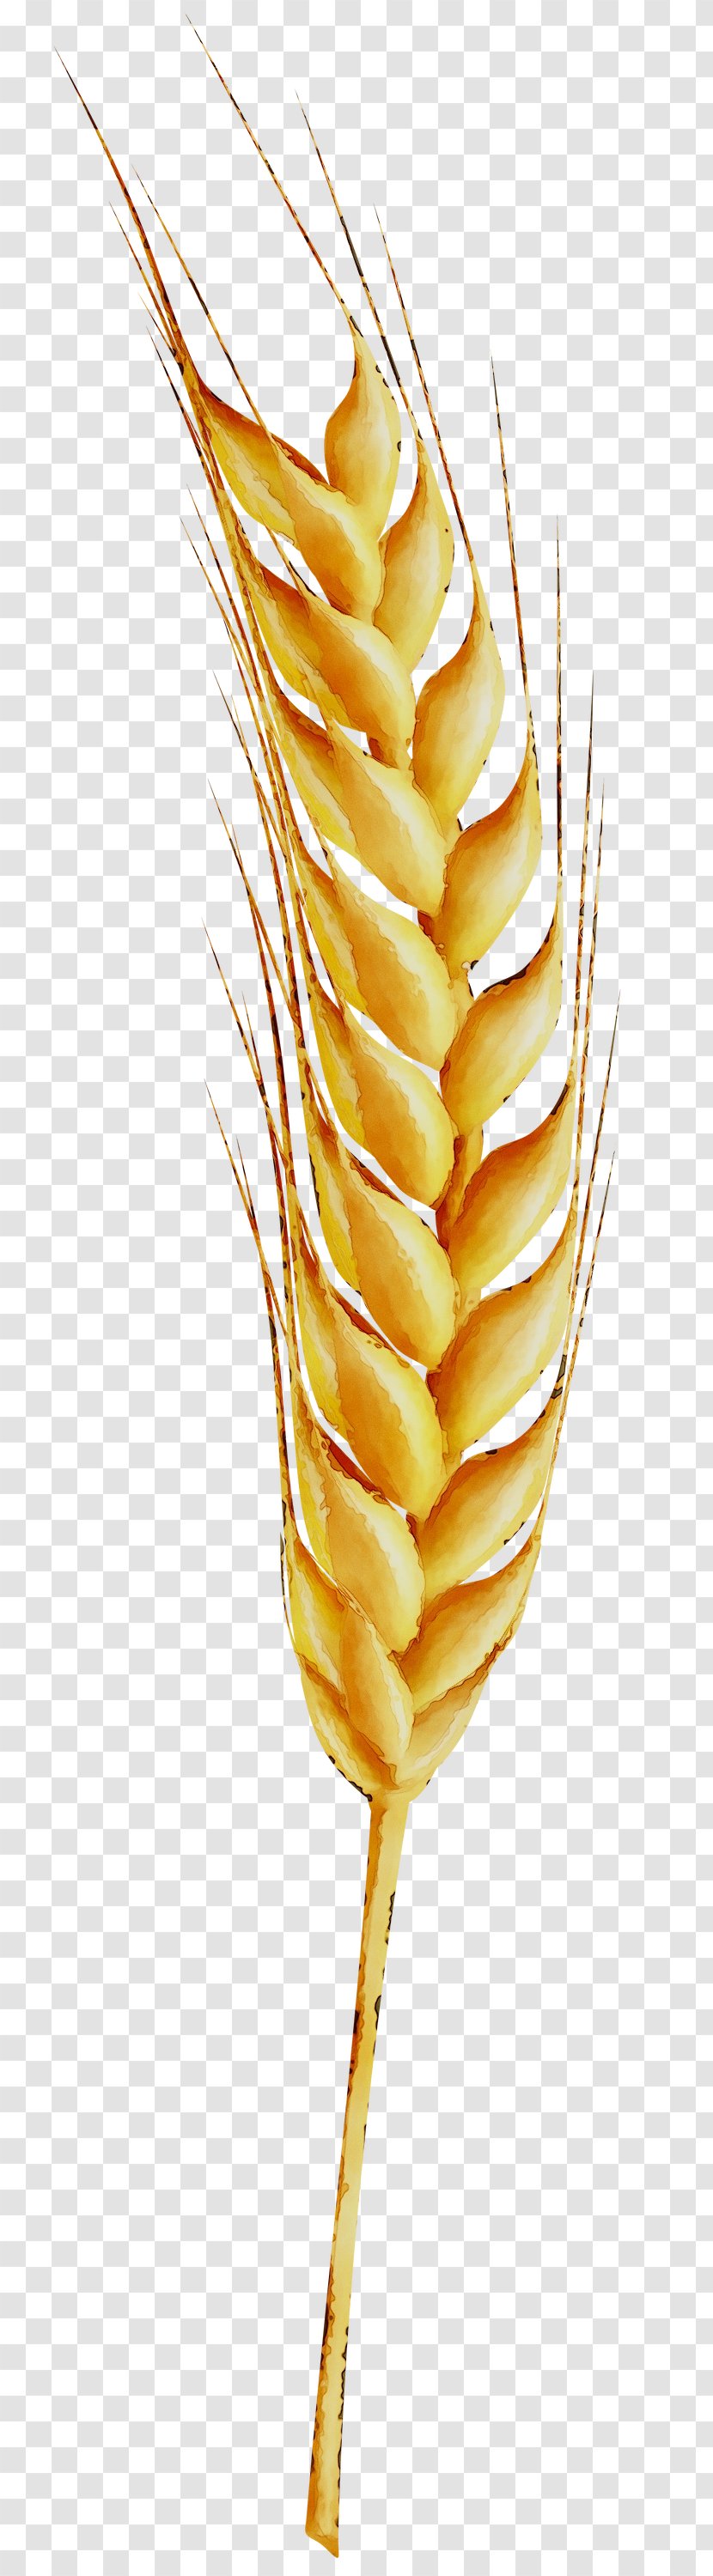 Grasses Wheat Grain Image - Grass Family Transparent PNG